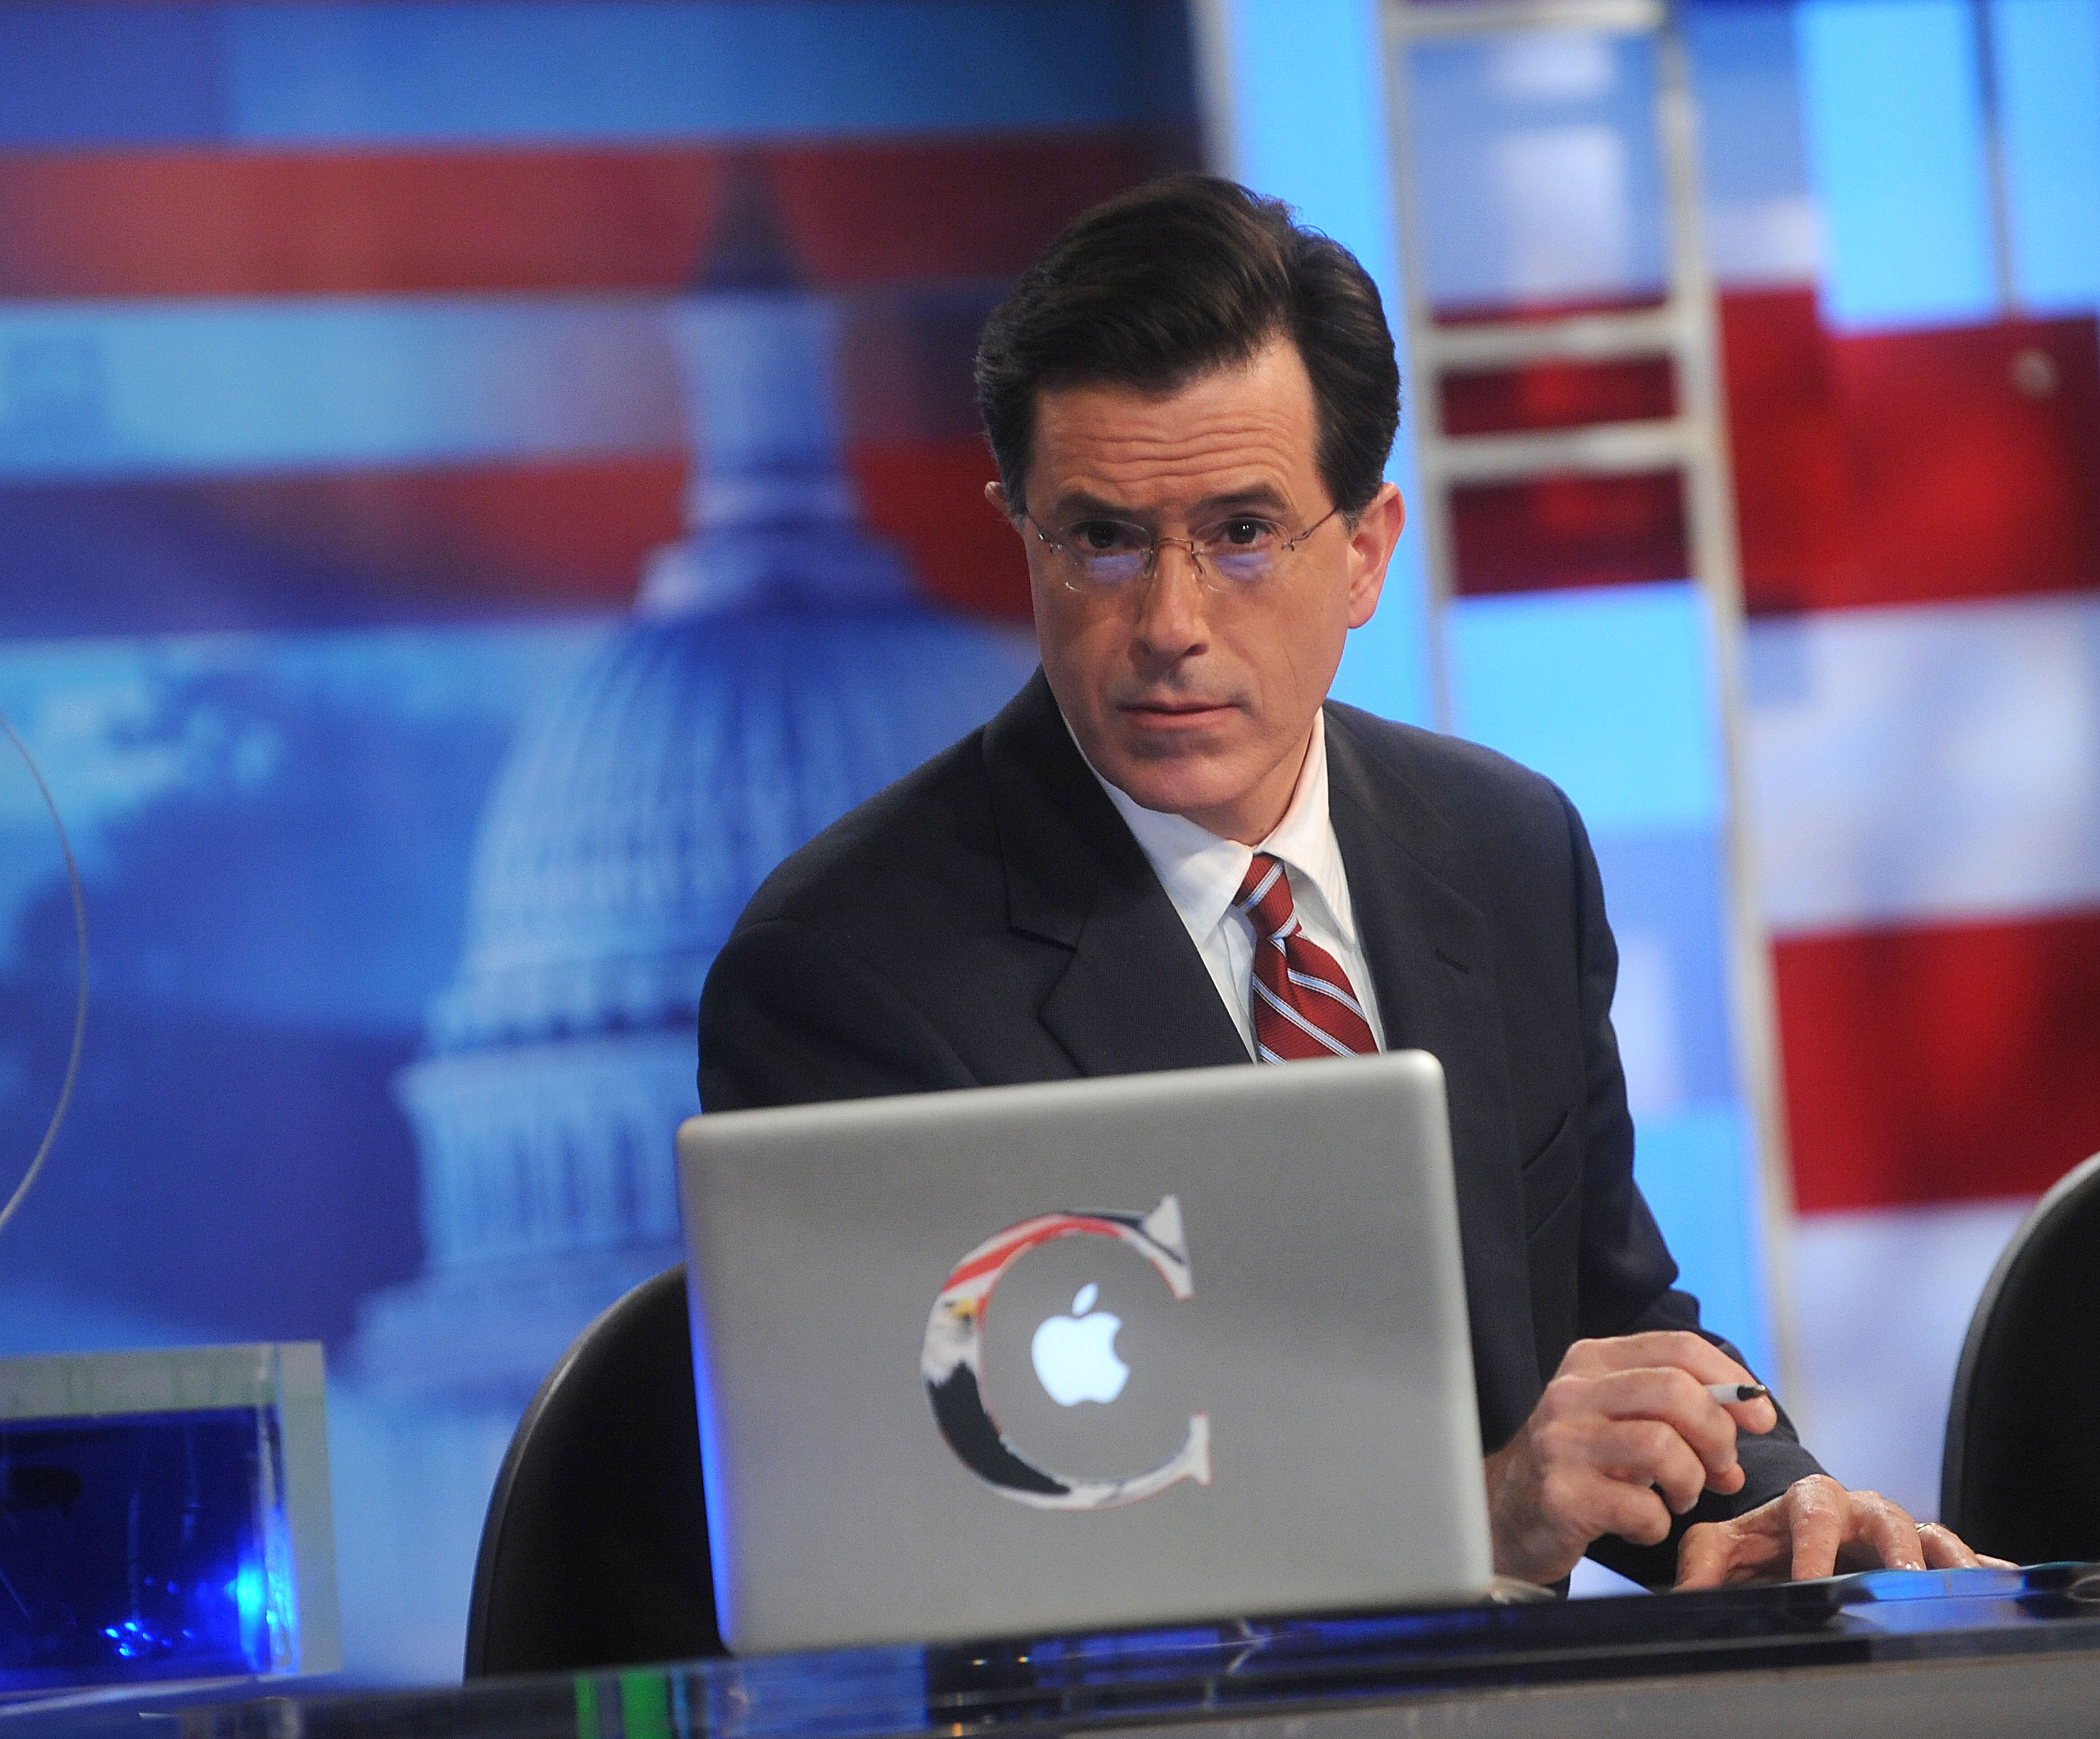 Stephen Colbert hosts Comedy Central's "Indecision 2008: America's Choice" at Comedy Central Studios on November 4, 2008 in New York City. (Brad Barket—Getty Images)